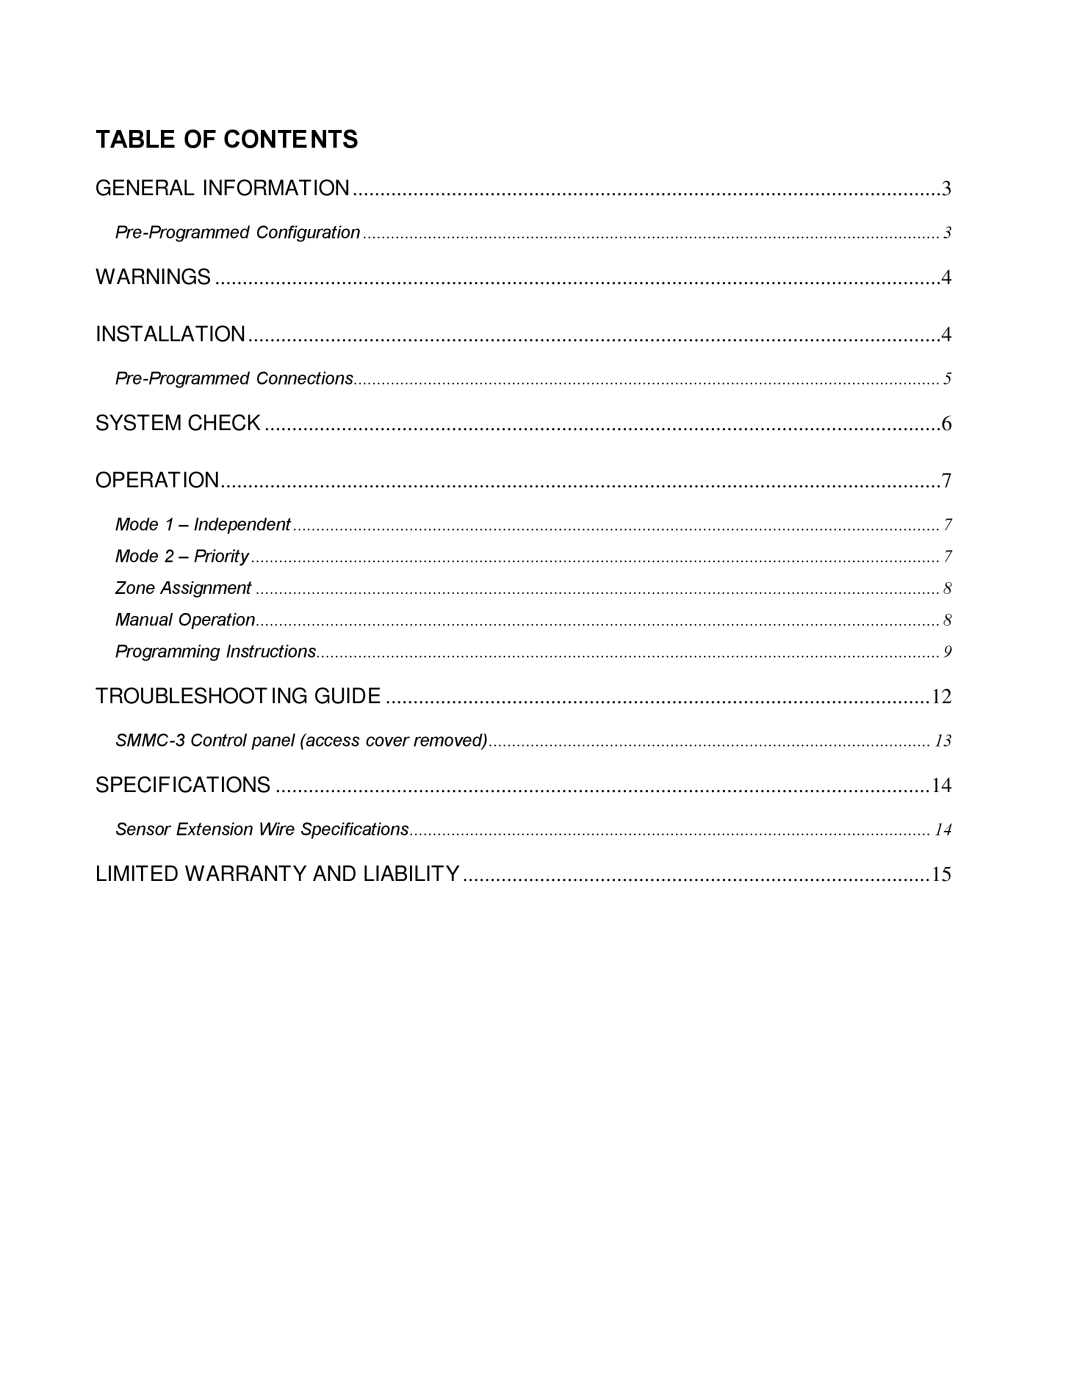 Emerson SMMC-3 manual Table of Contents 